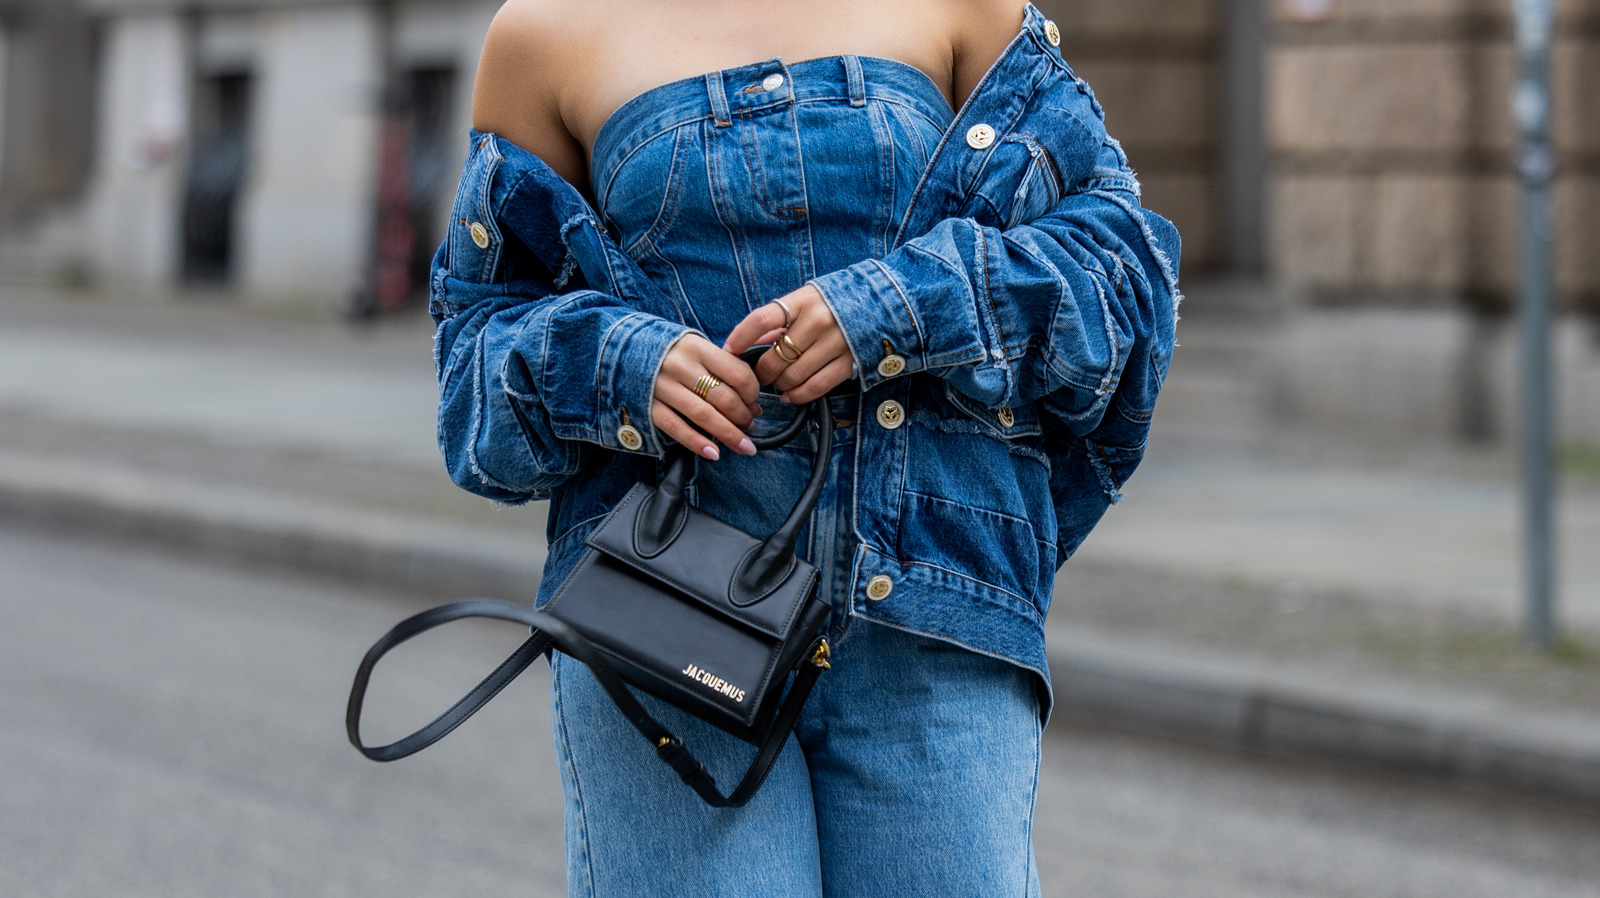 mini bag trend, born from a need for less